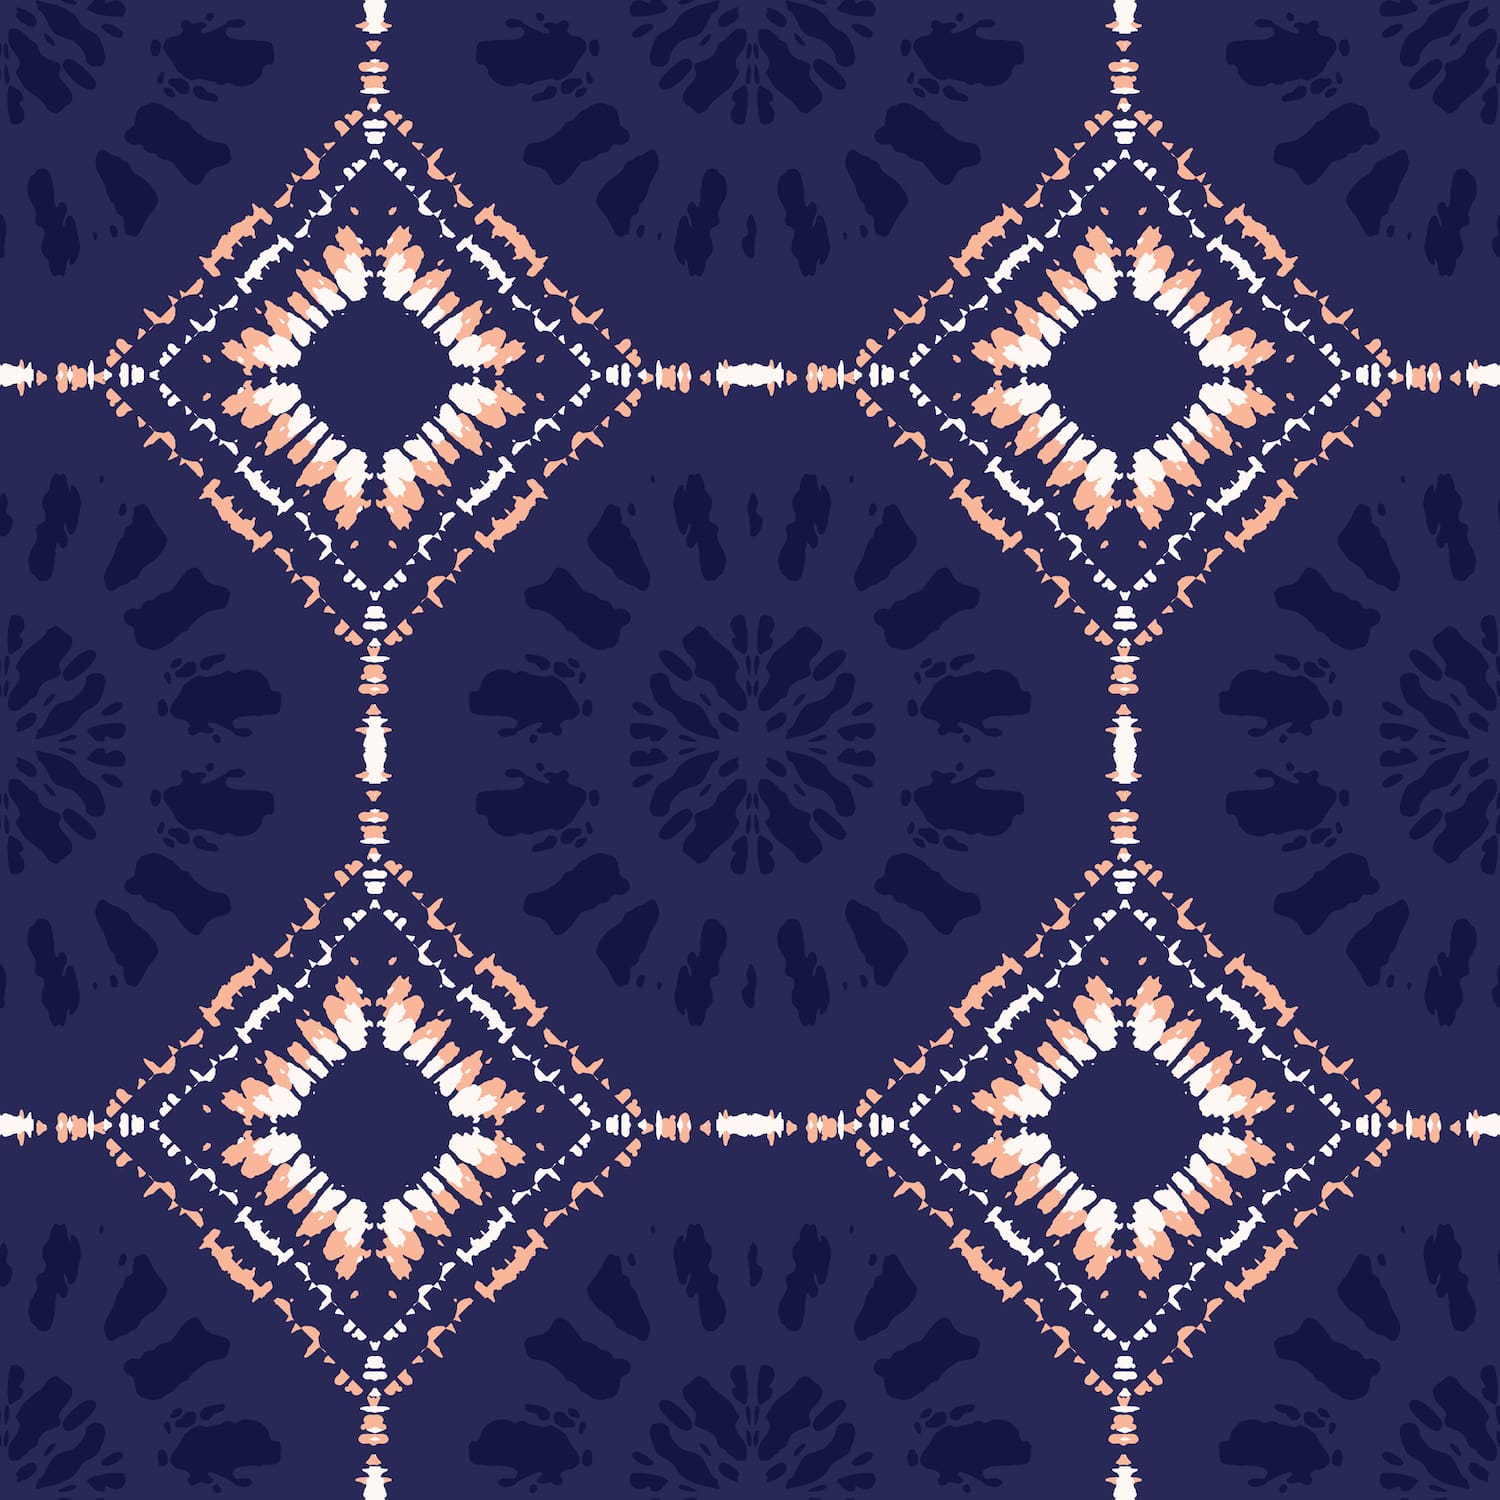 mirrored repeat pattern